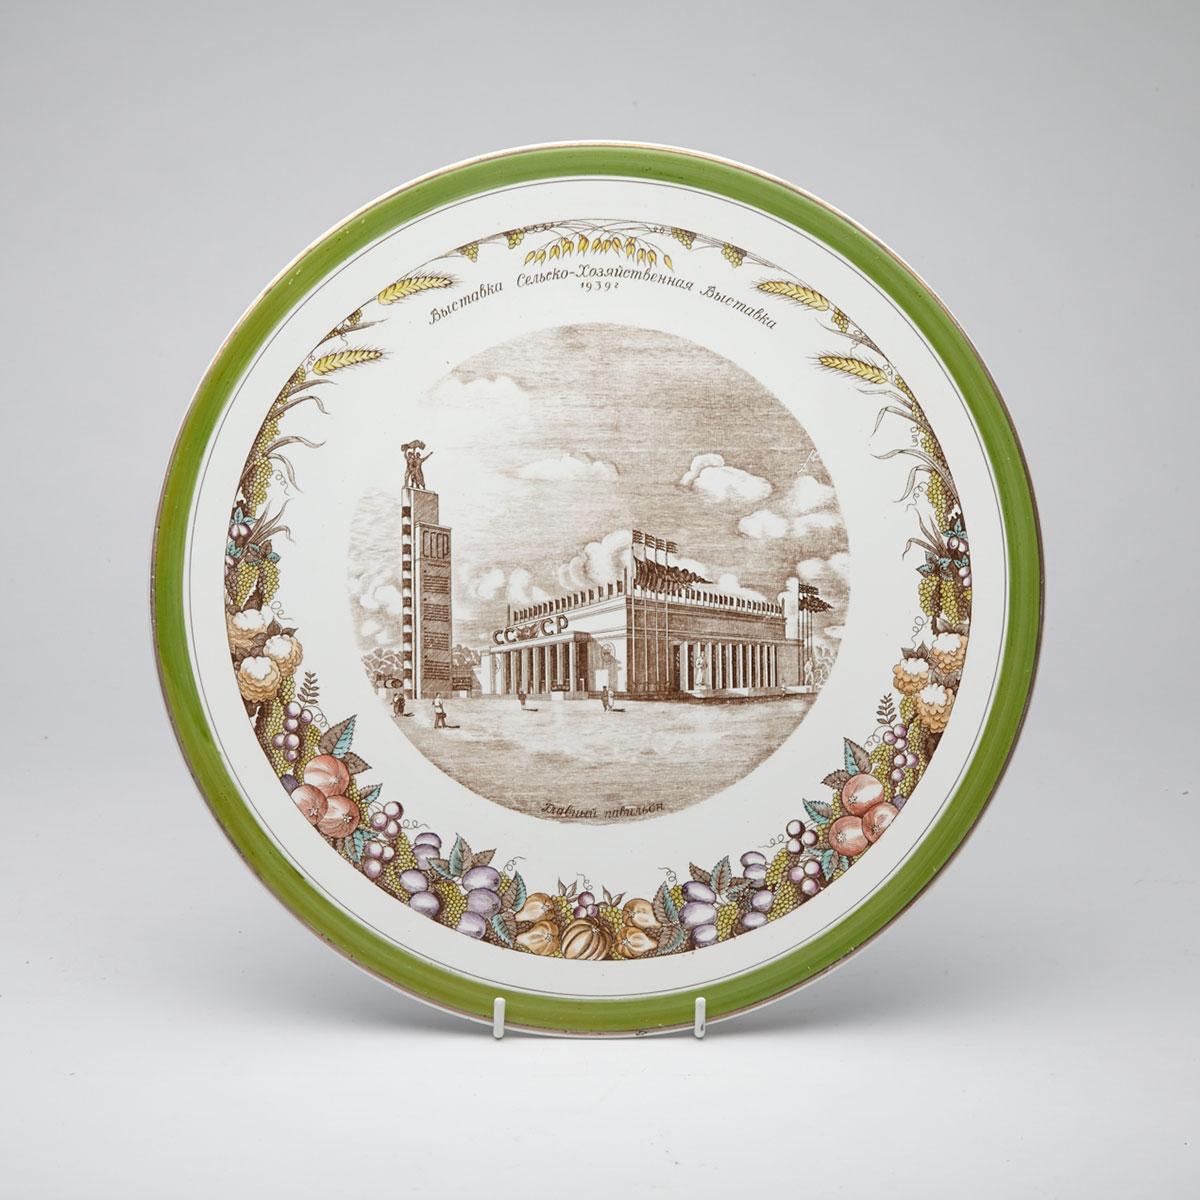 Konokovo Faience Moscow Agricultural Exhibition Charger, 1939